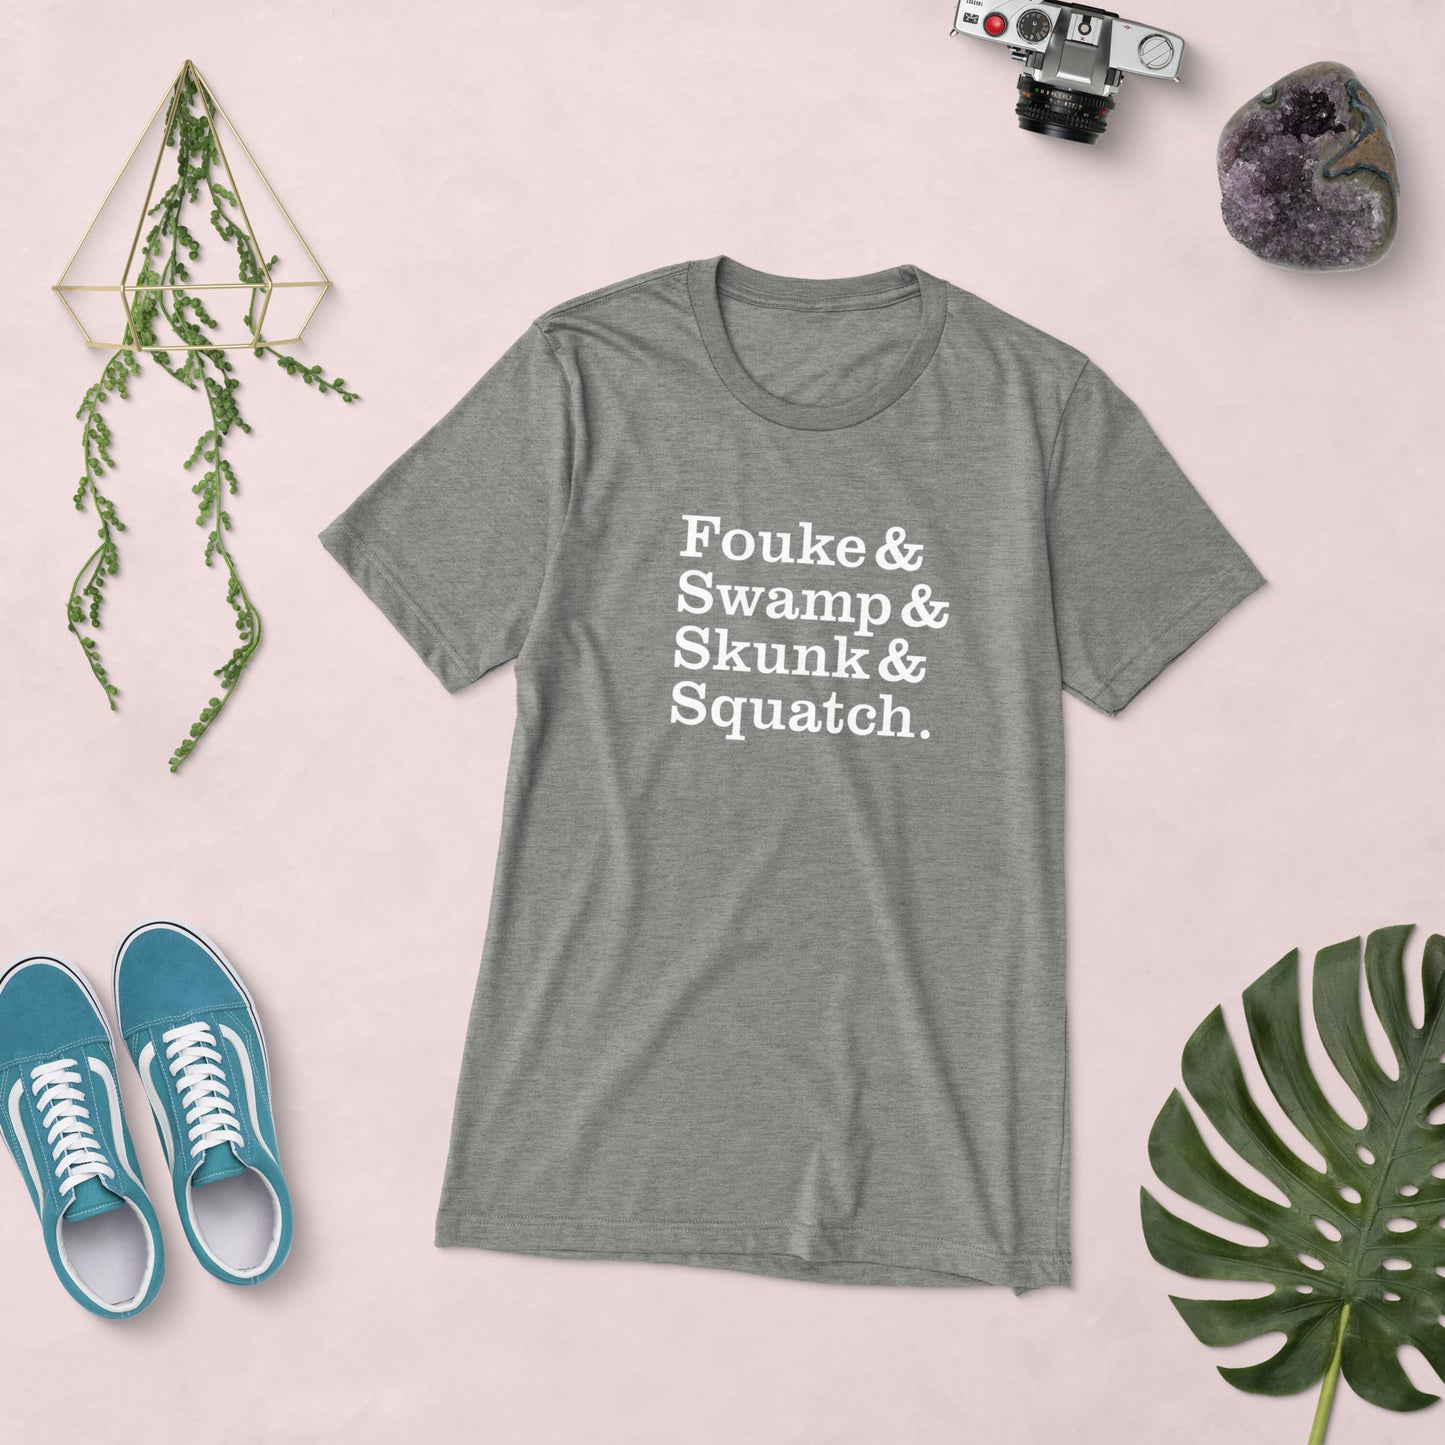 Fouke & Swamp & Skunk & Squatch: Bigfoot of the South T-Shirt